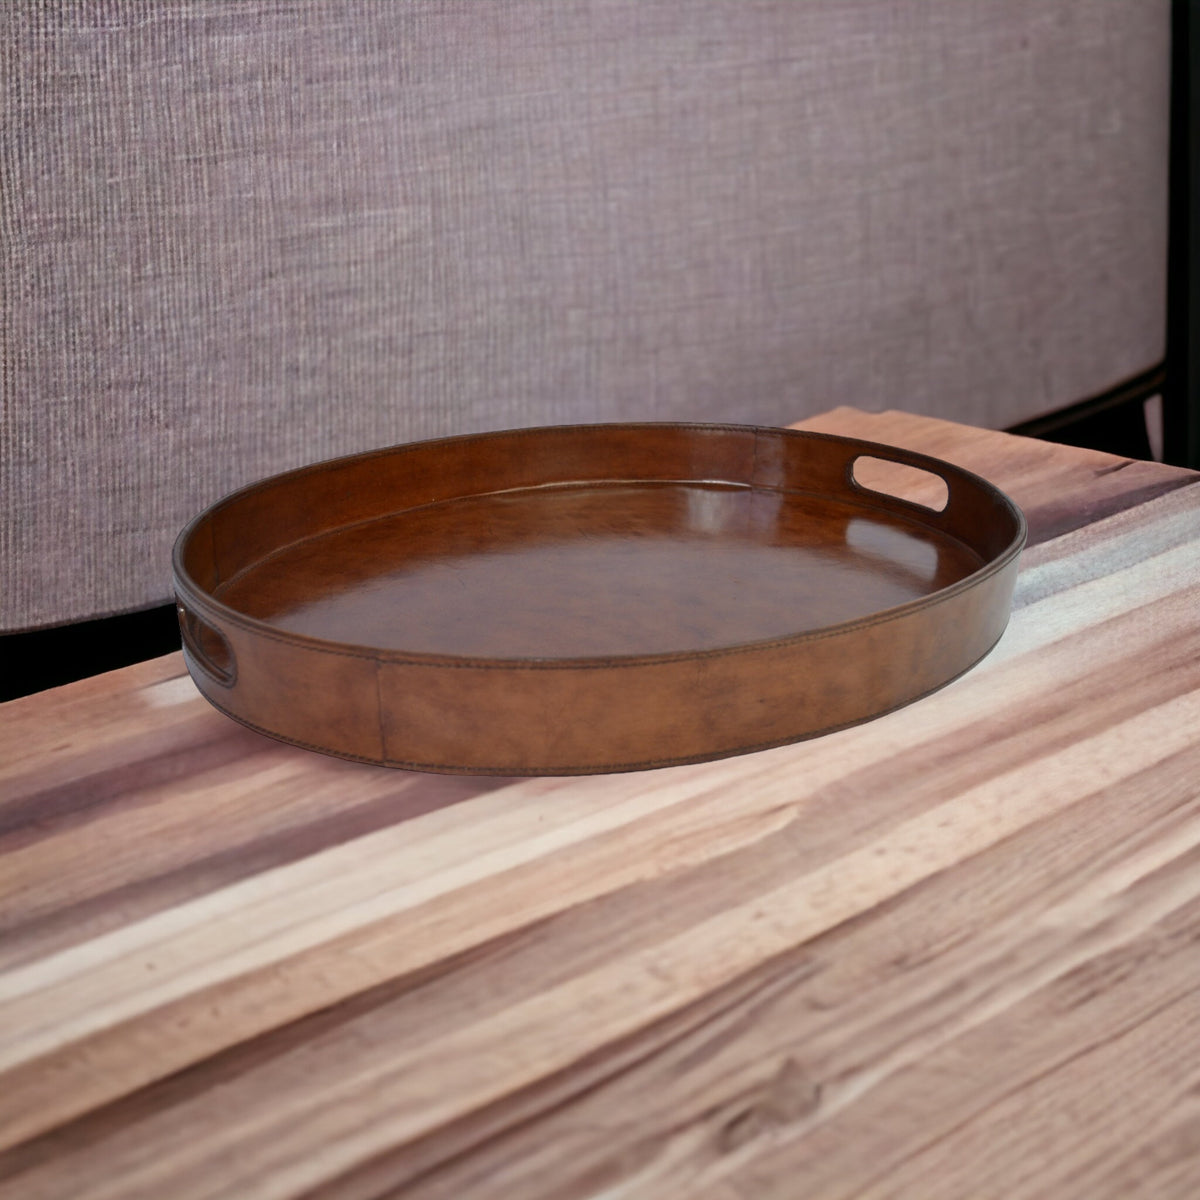 Morthil Tan Leather Oval Tray - Notbrand